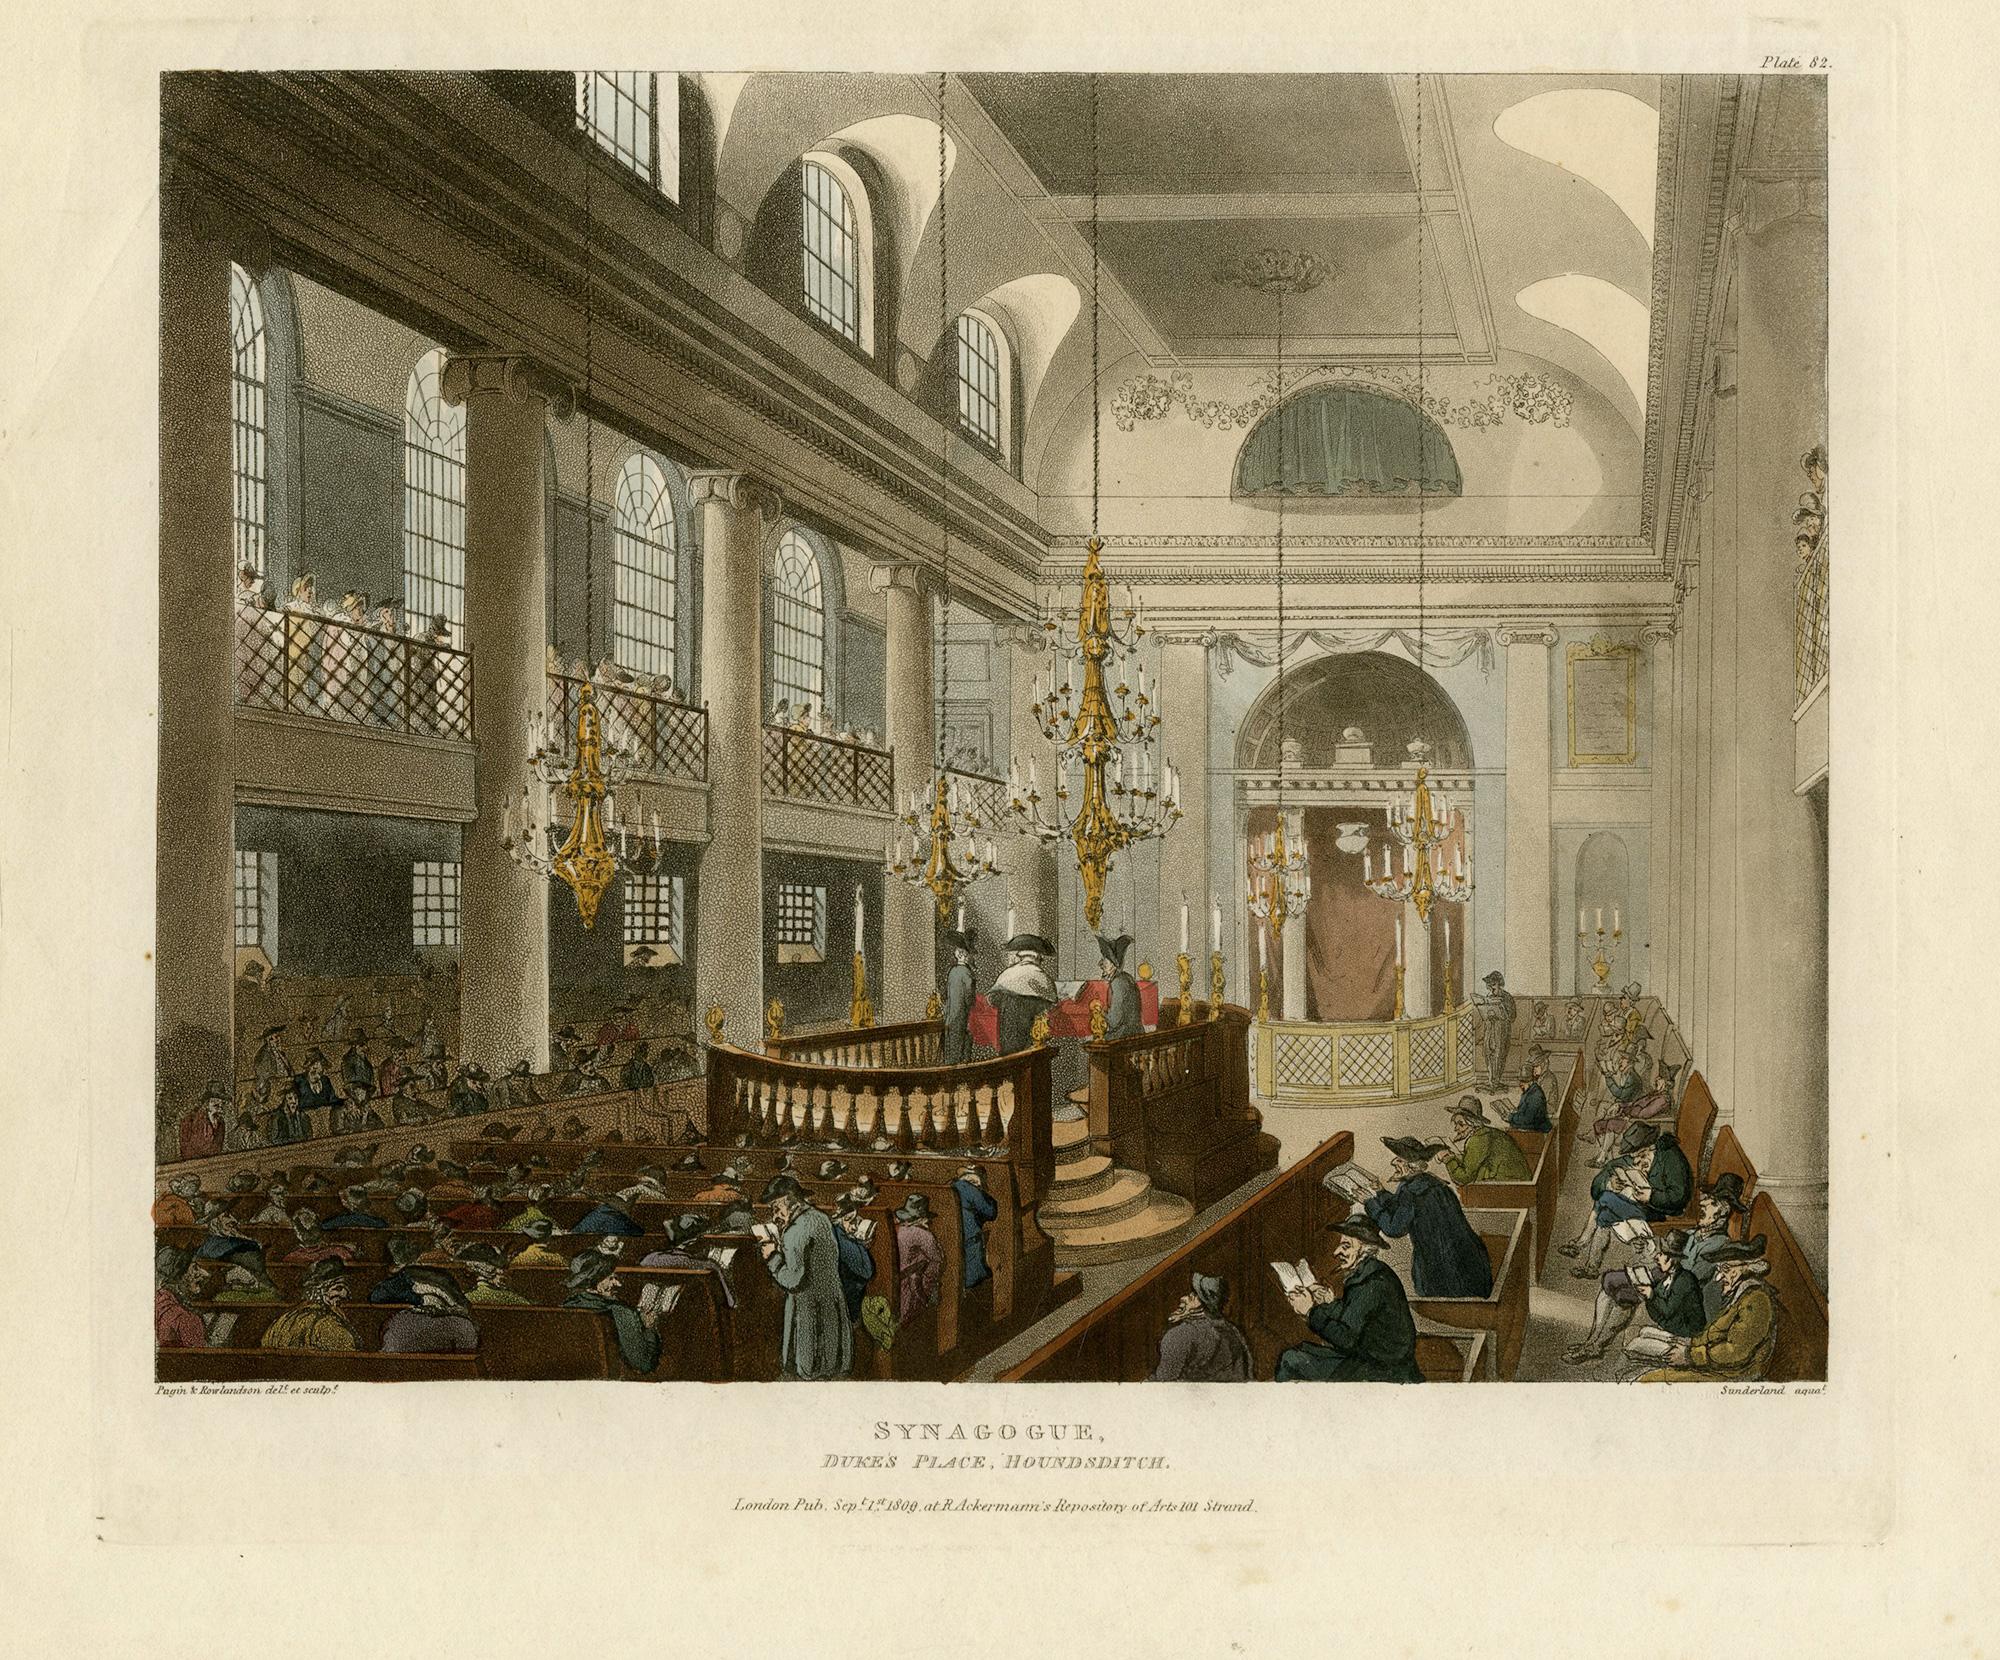 Synagogue Duke's Palace Houndsditch by Th. Sunderland after Pugin & Rowlandson - Print by Thomas Rowlandson